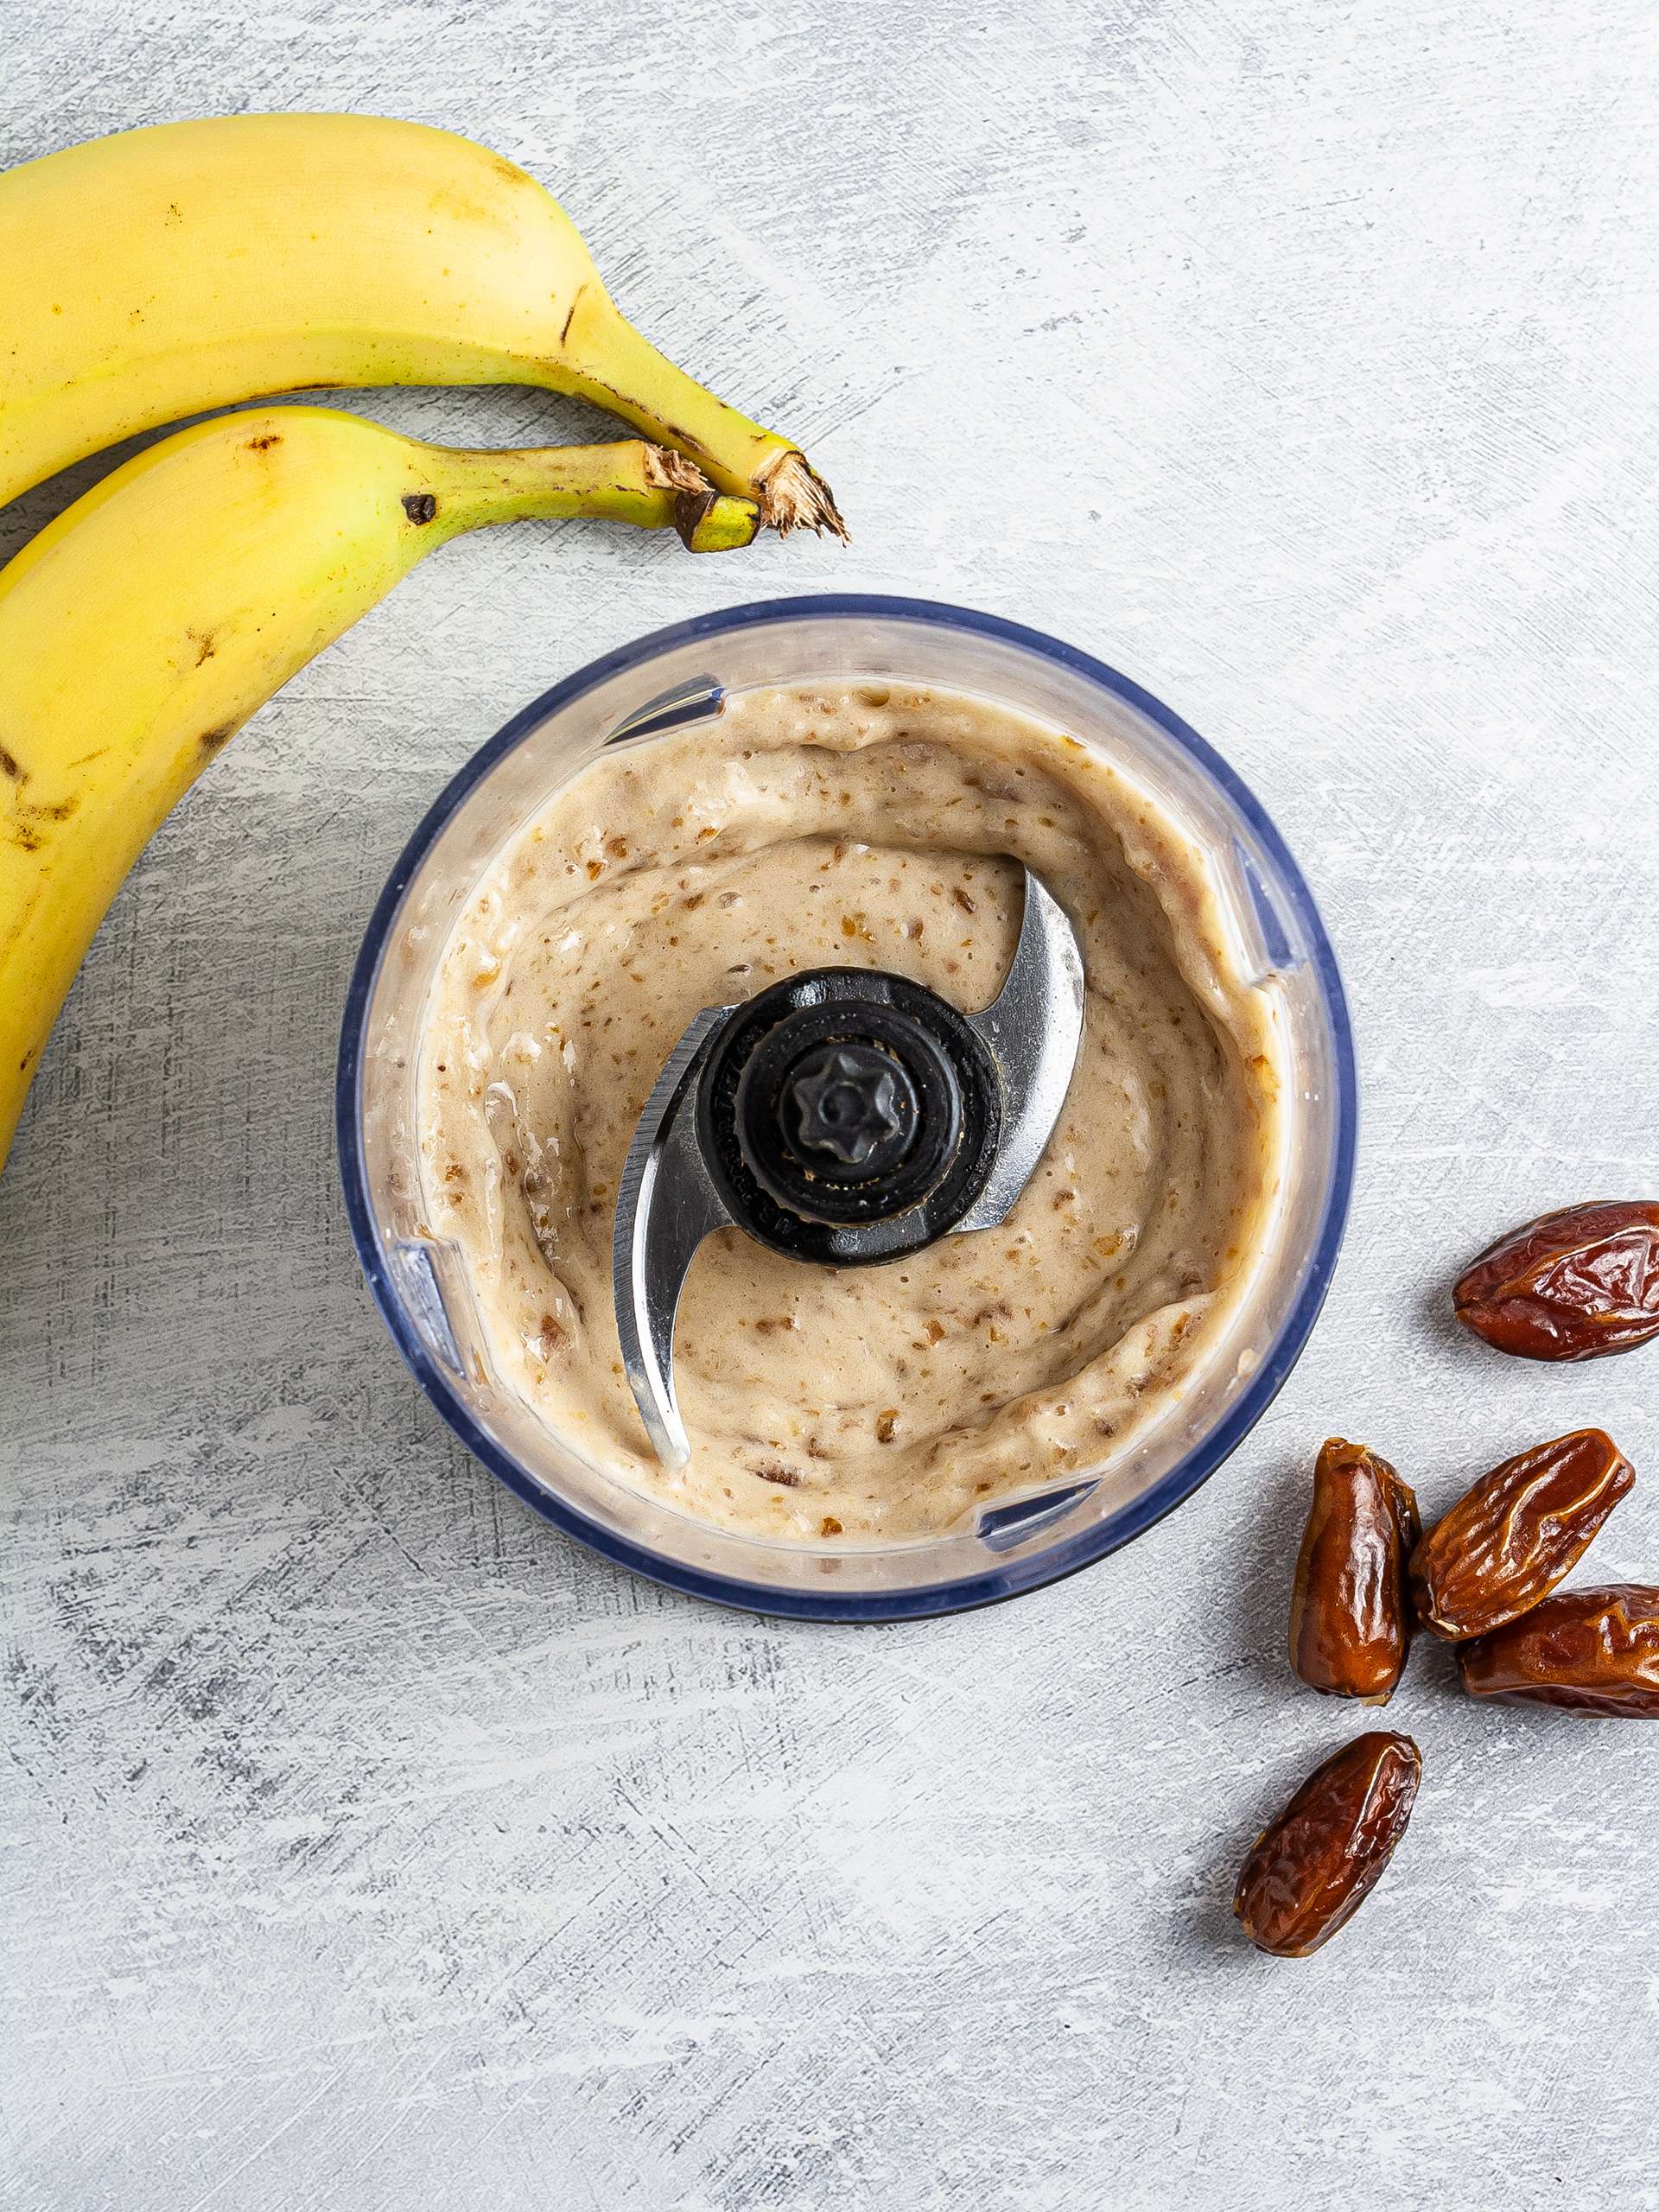 Blended bananas and dates